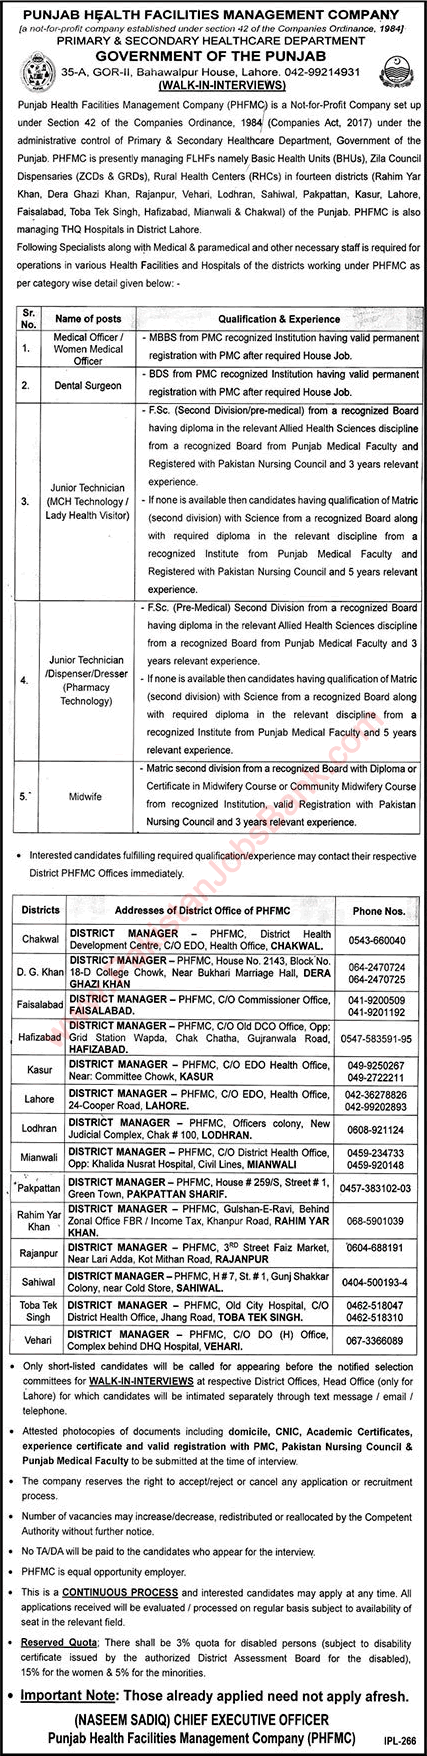 Punjab Health Facilities Management Company Jobs 2022 PHFMC Walk In Interview Medical Officers, Technicians & Others Latest